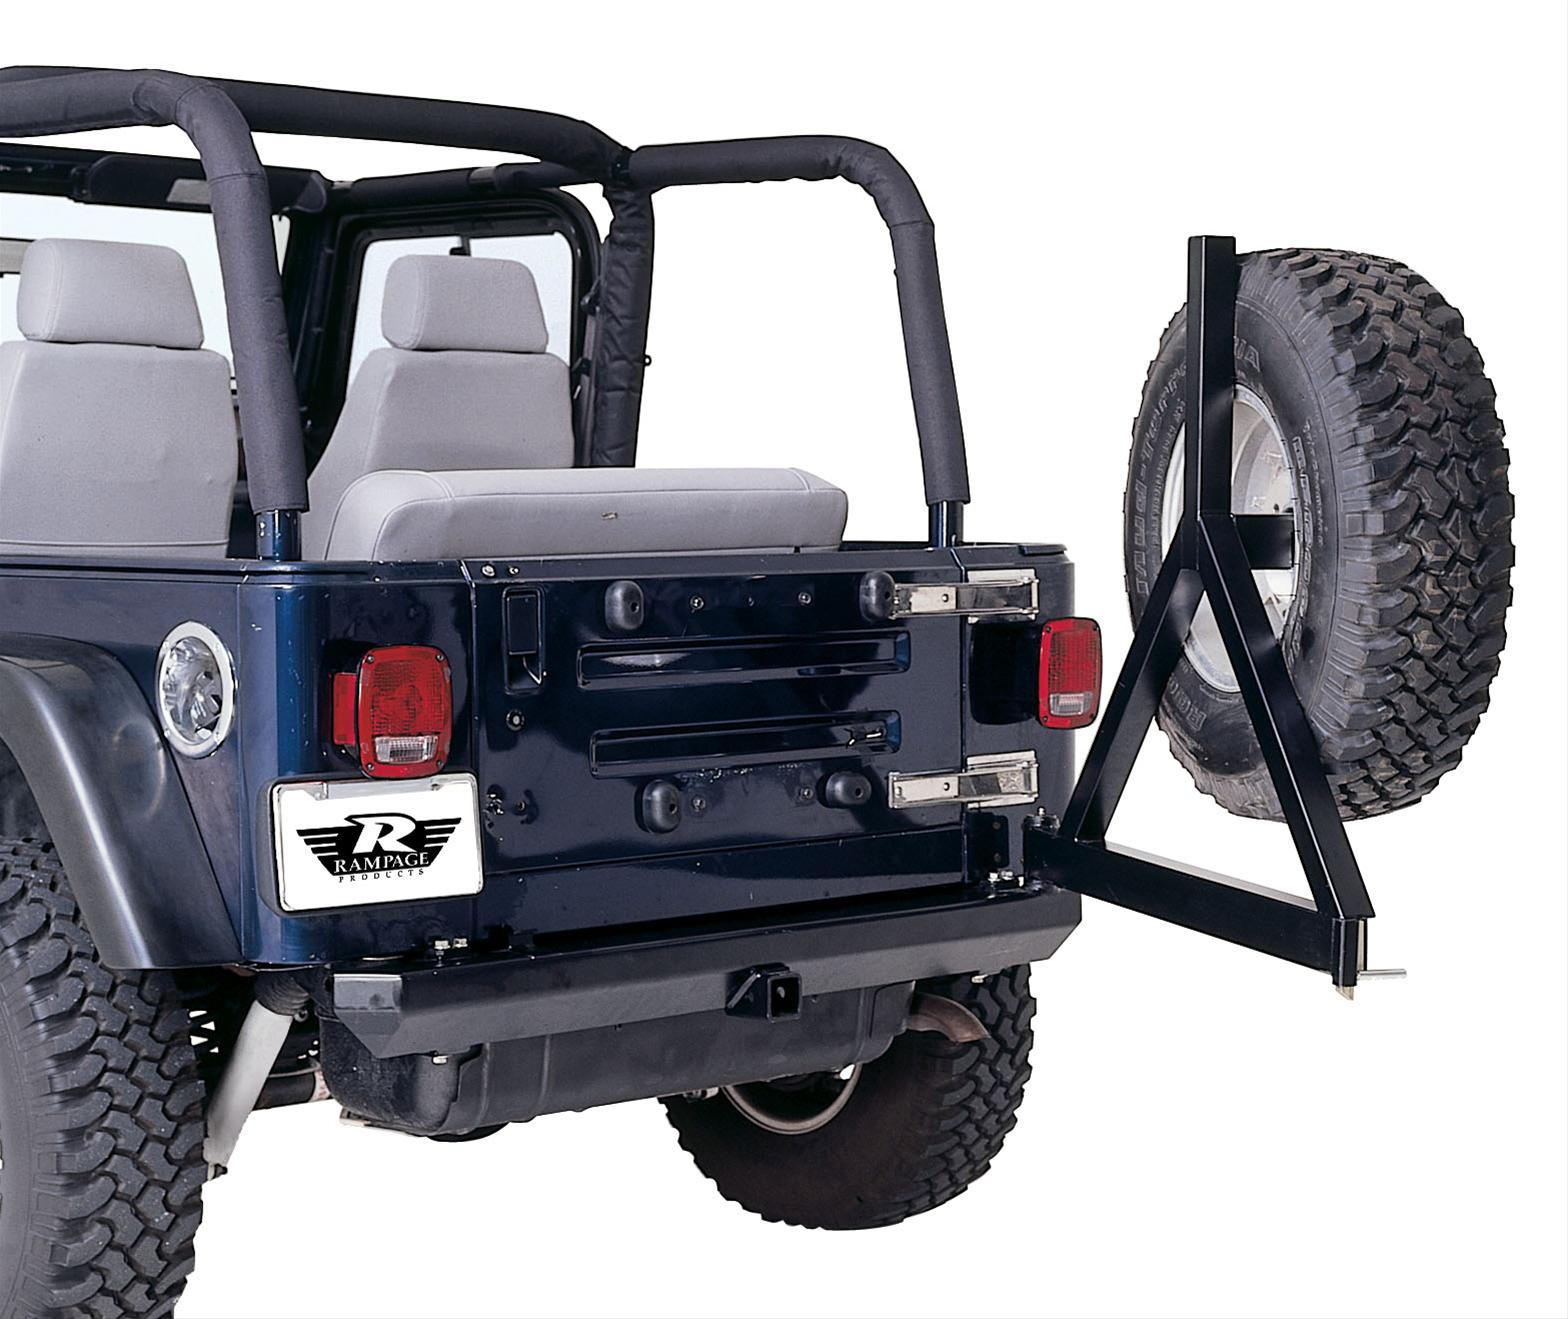 Rampage 769015 - Rampage Roll Bar Cover Kits. 